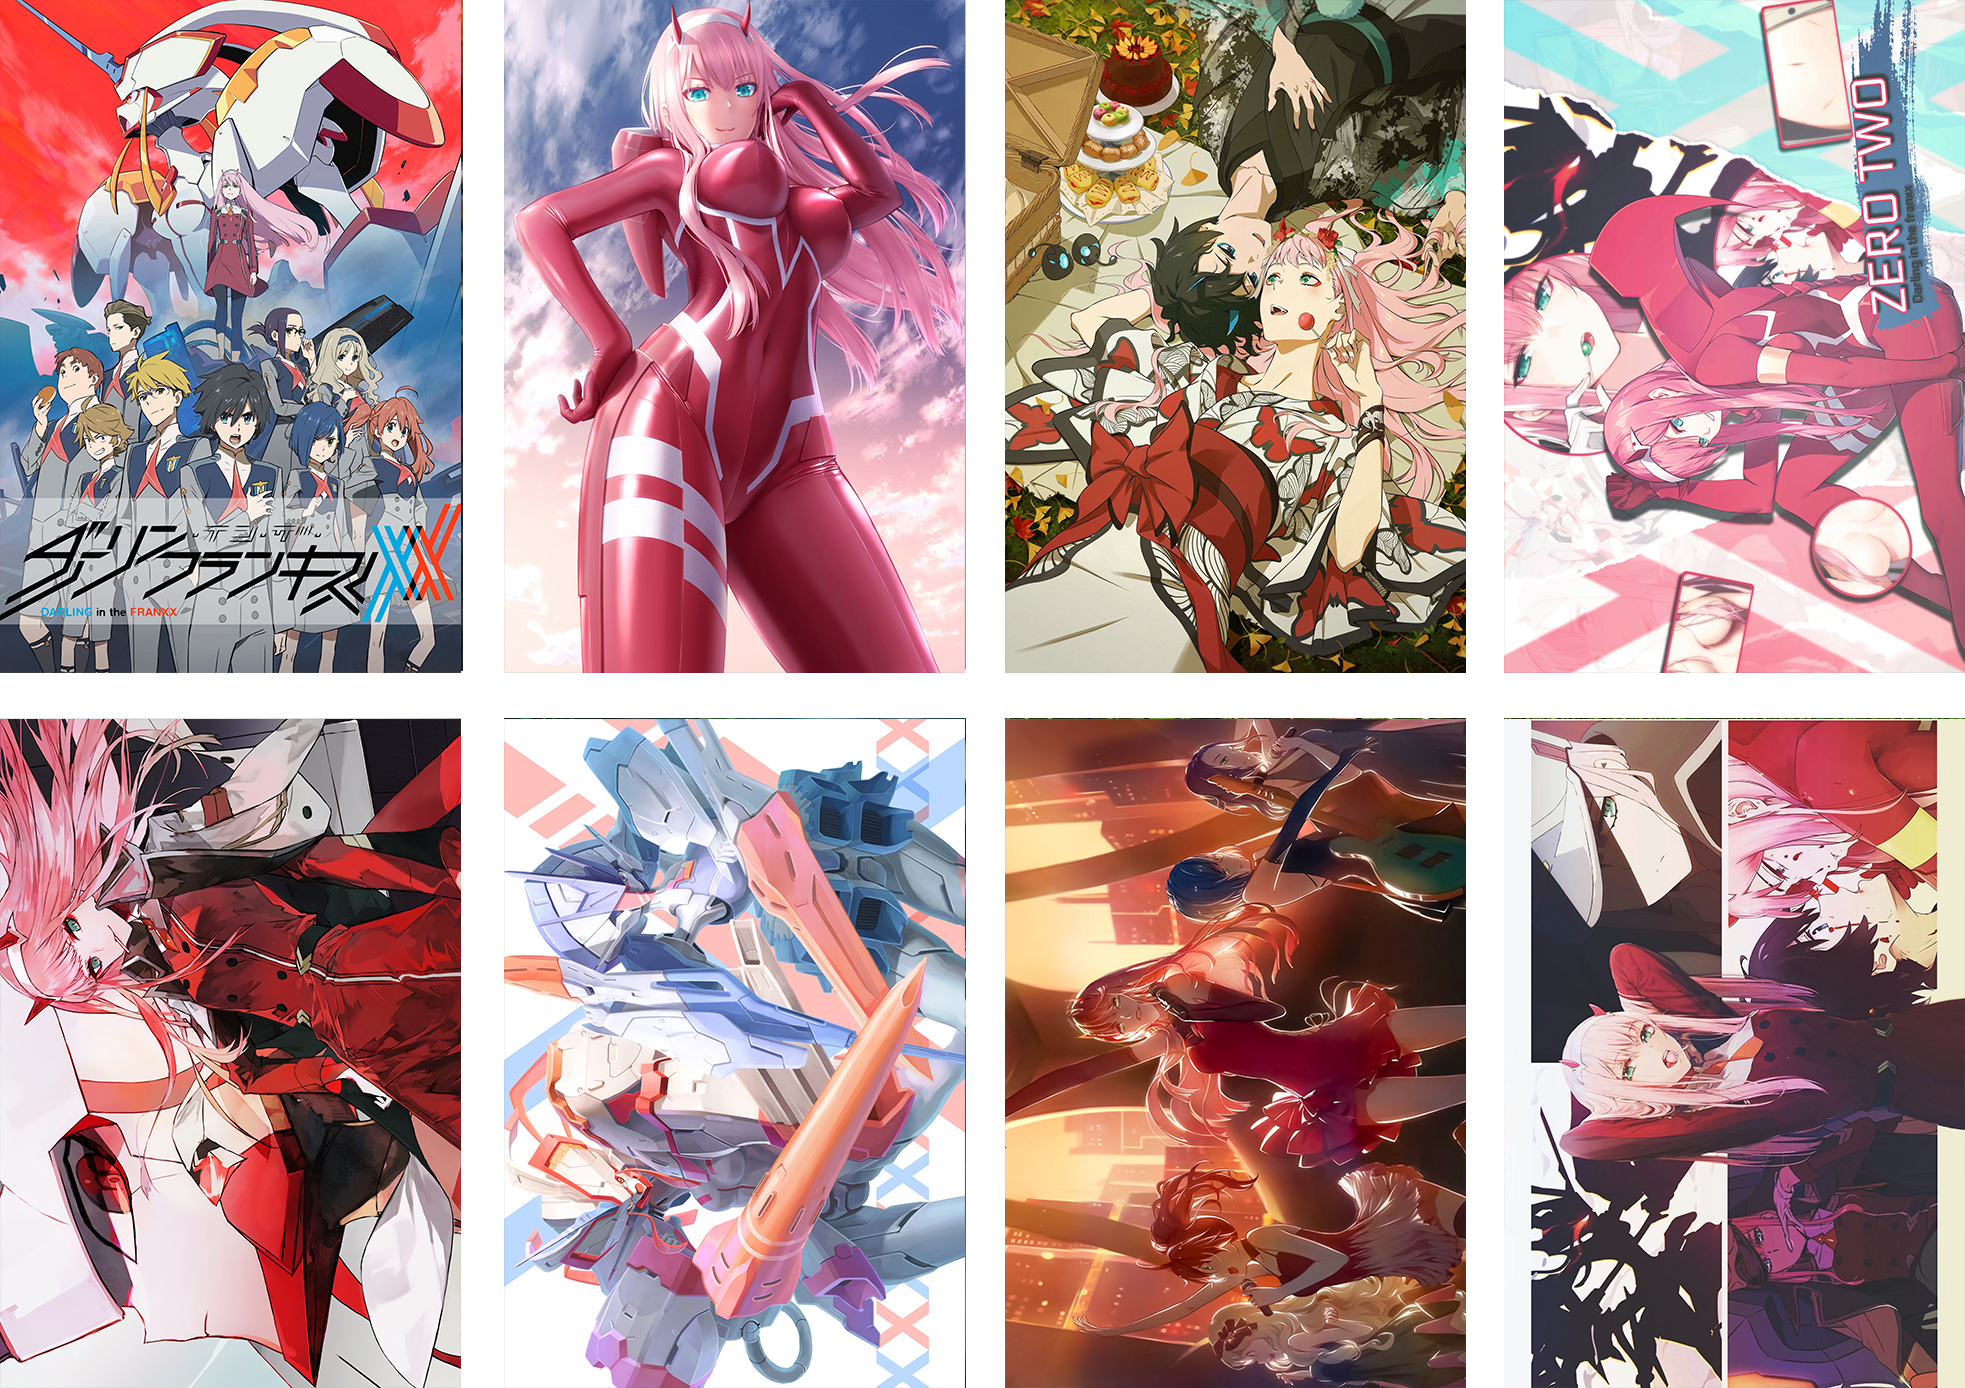 Darling in the franxx anime posters price for a set of 8 pcs